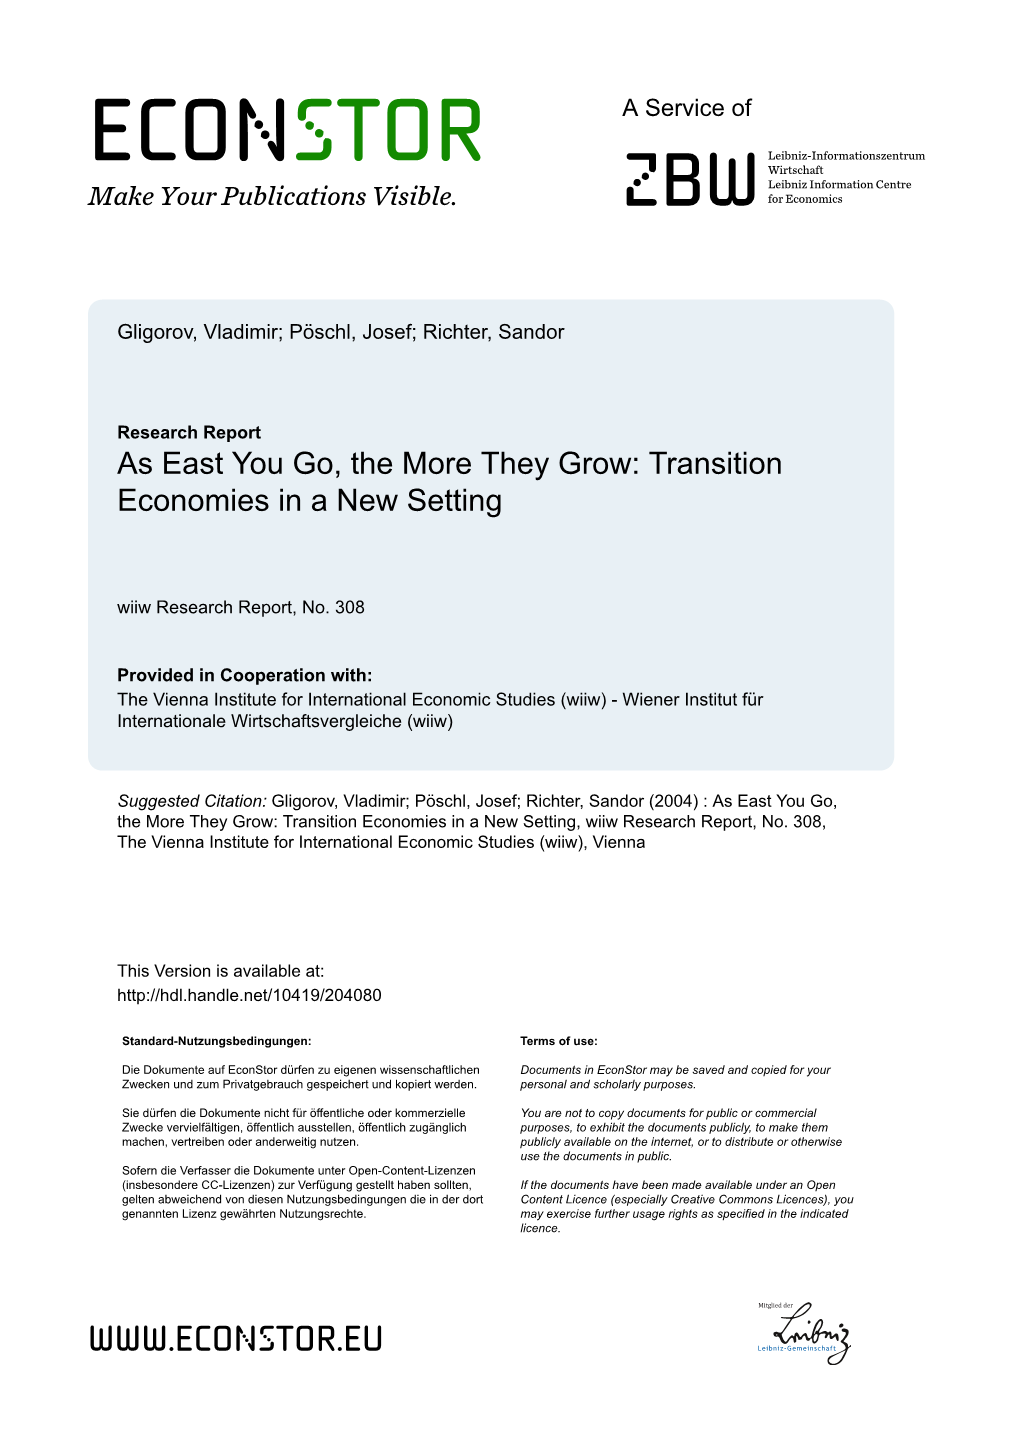 Transition Economies in a New Setting